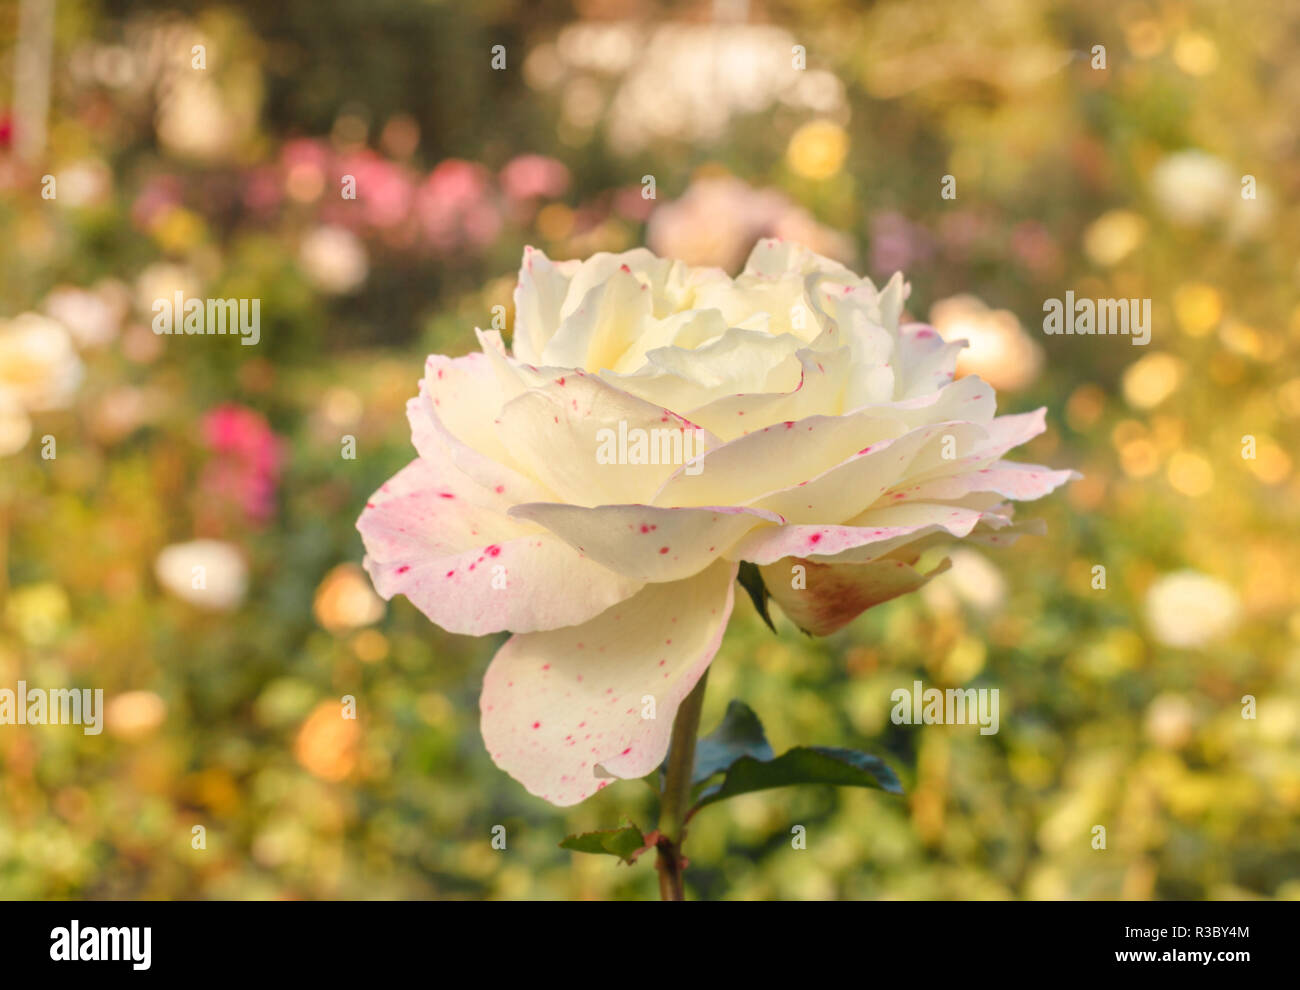 Pretty white rose with pink spots at golden fall garden Stock Photo